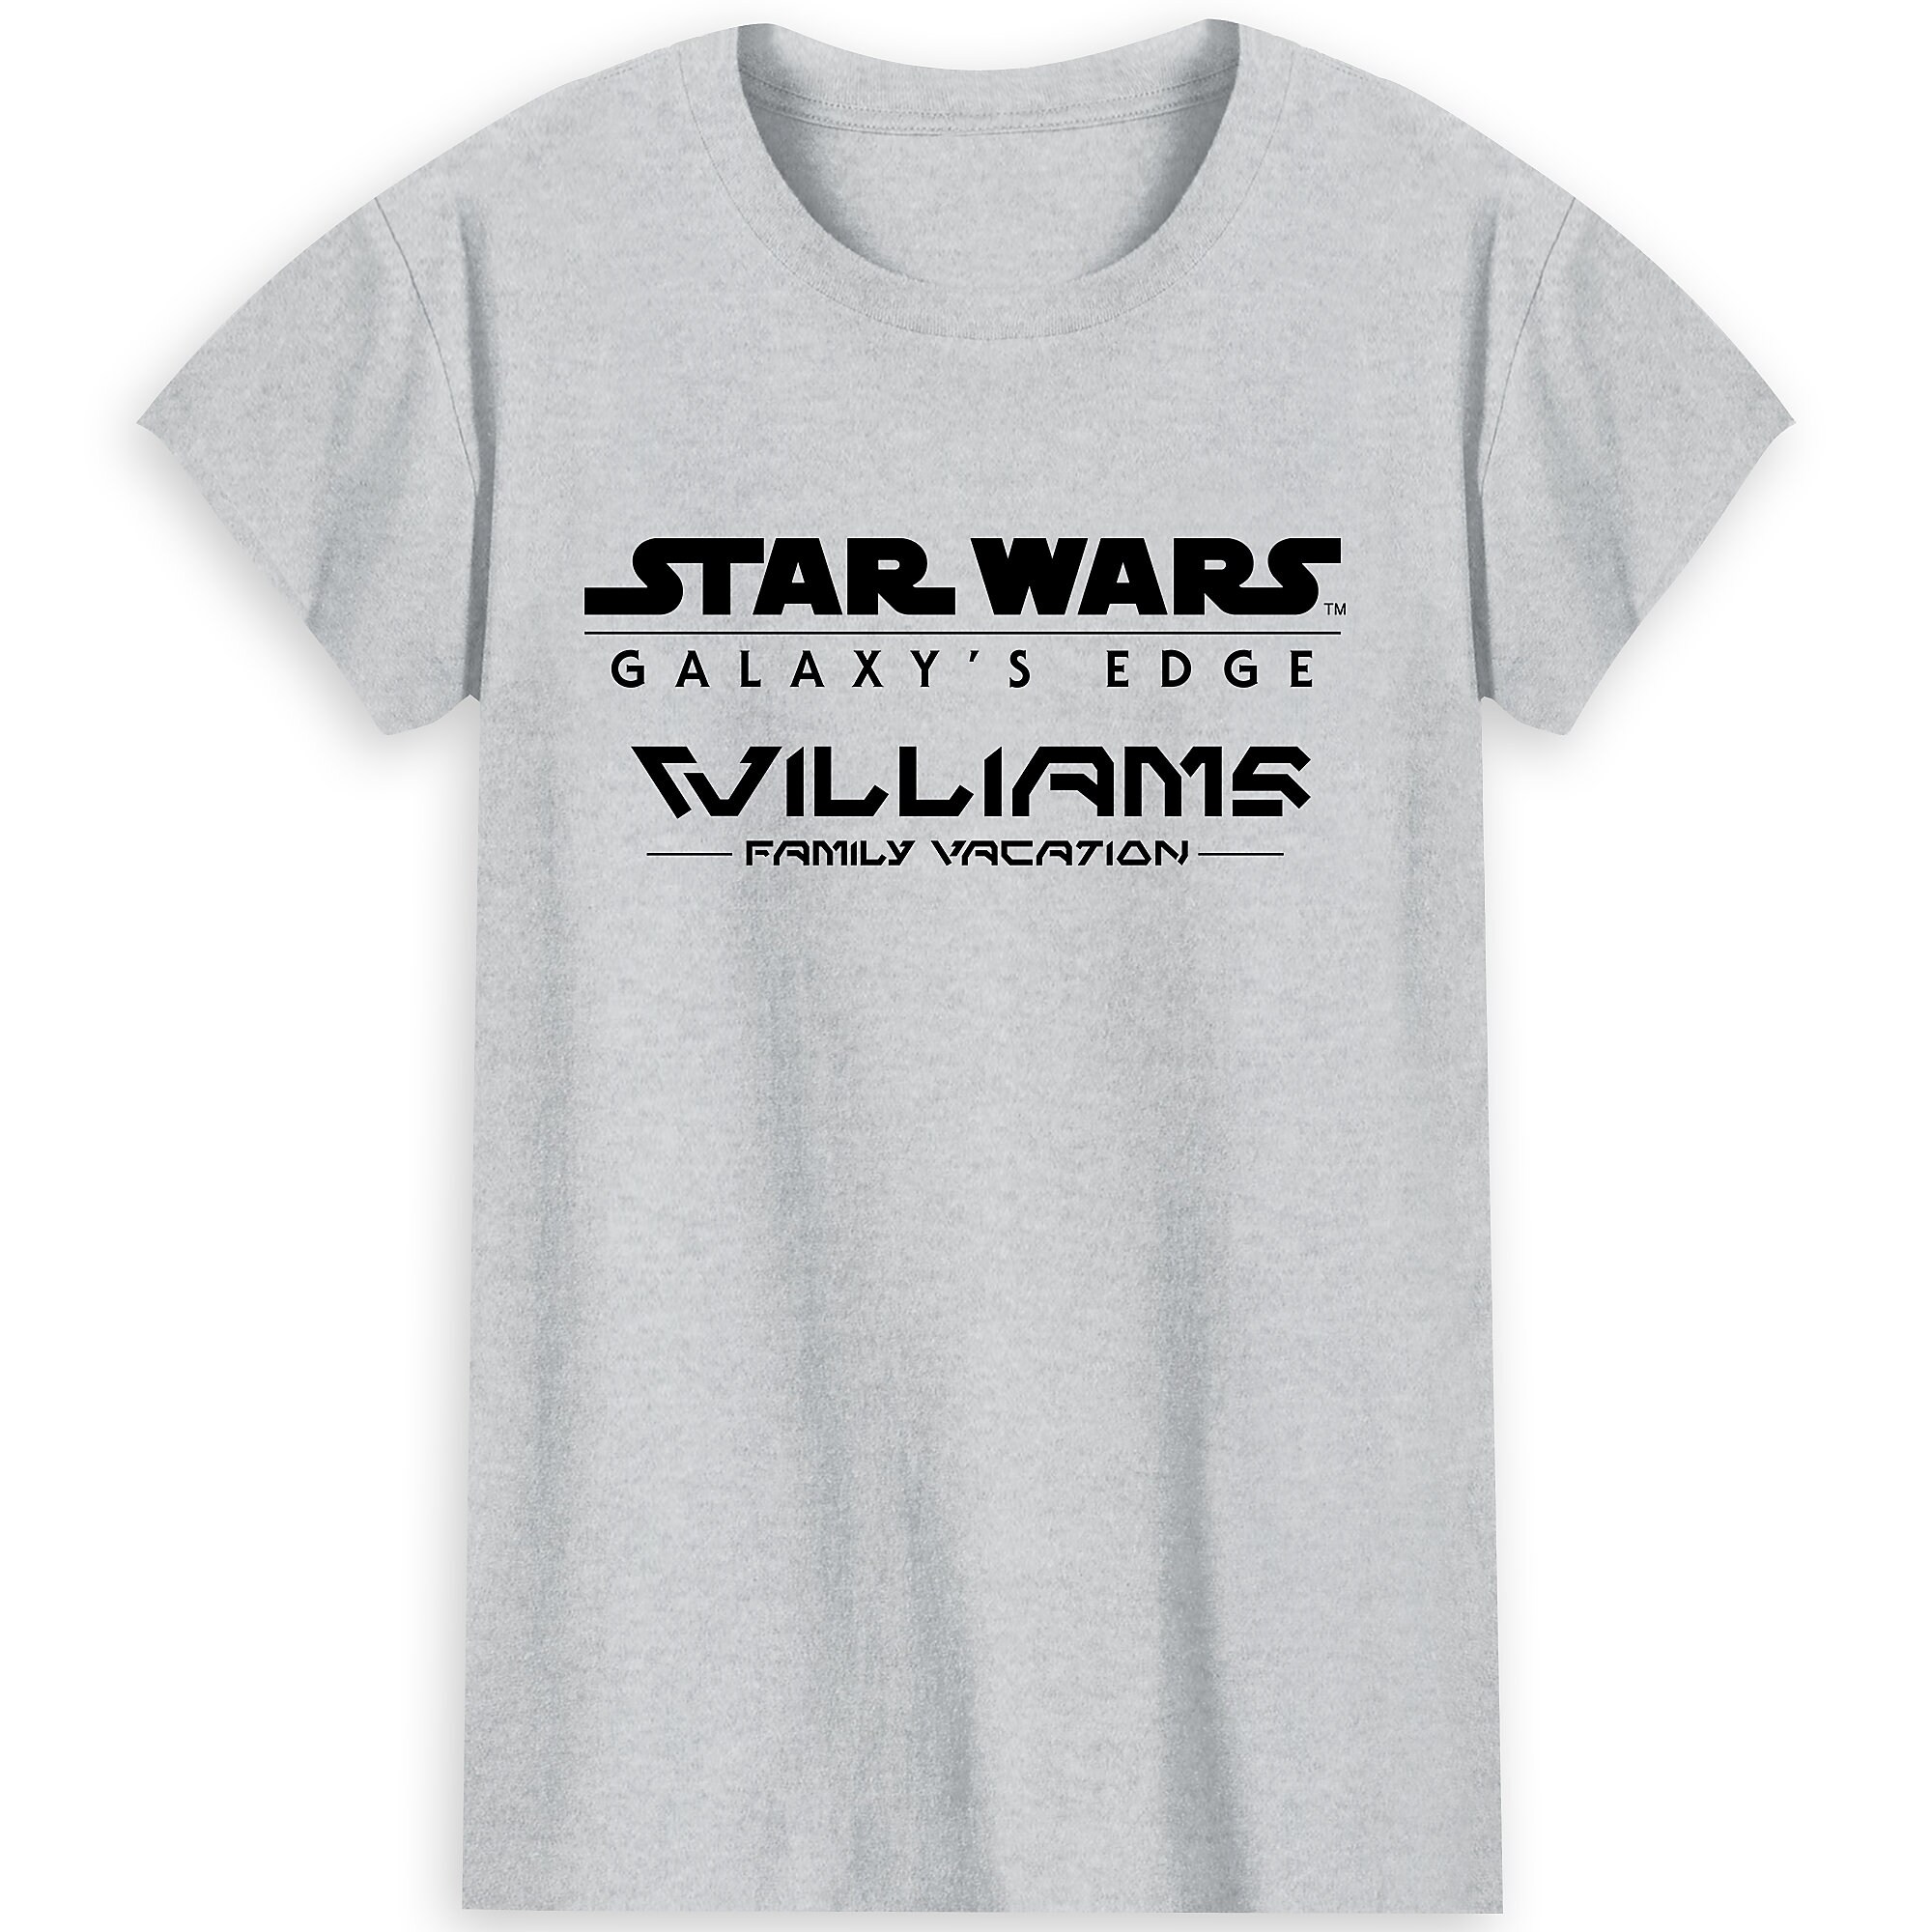 Women's Star Wars Galaxy's Edge TShirt Customized released today